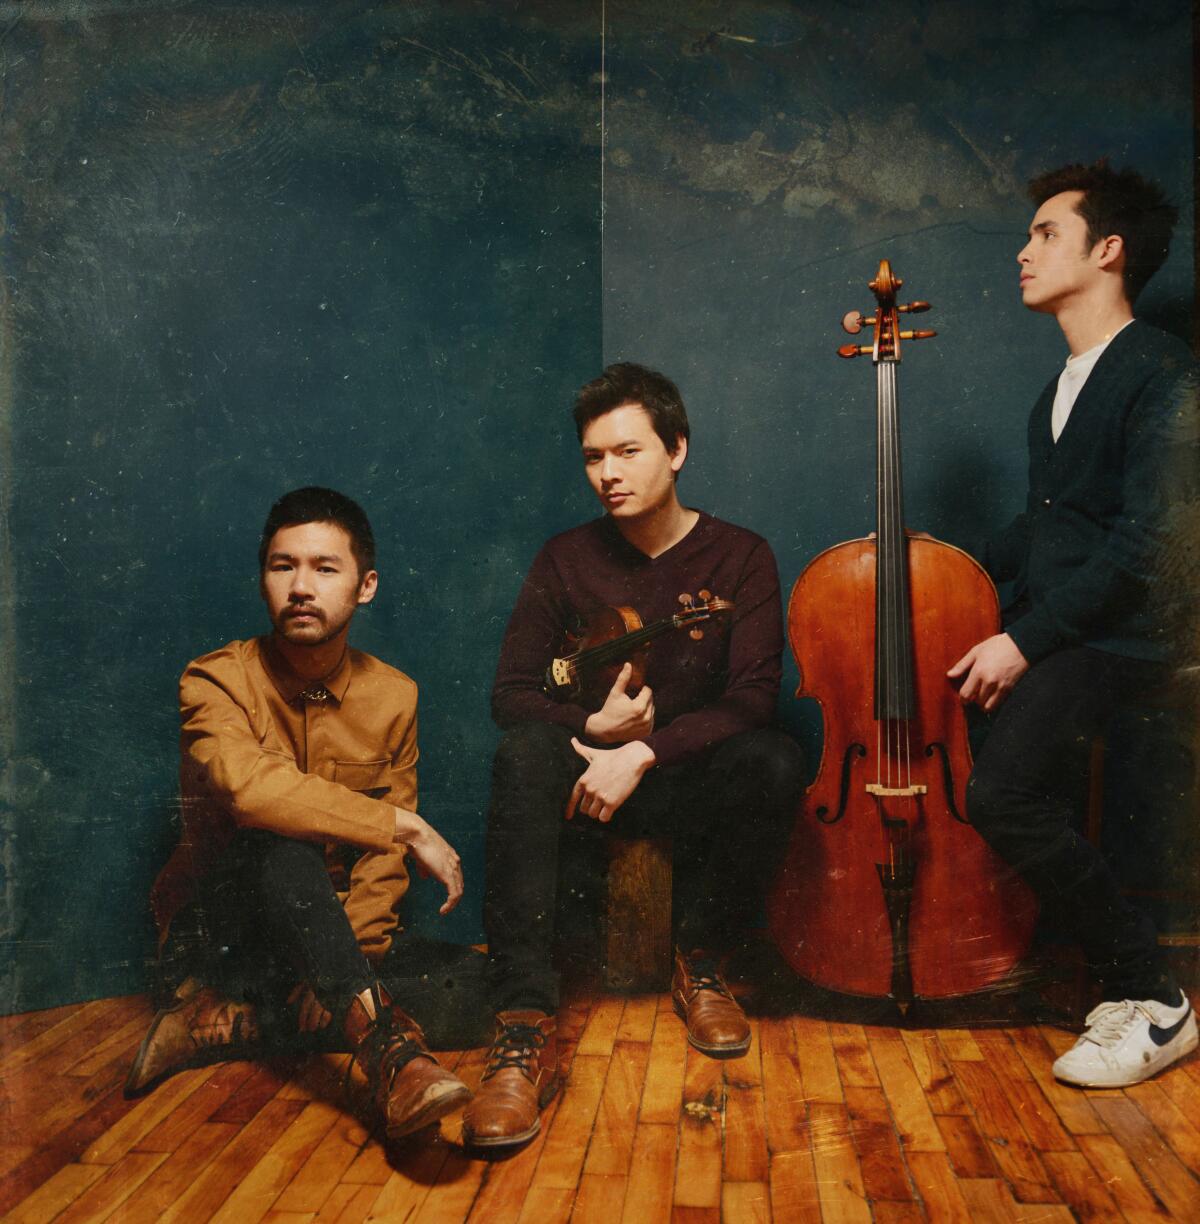 Three classical musicians sit in a corner with their instruments.